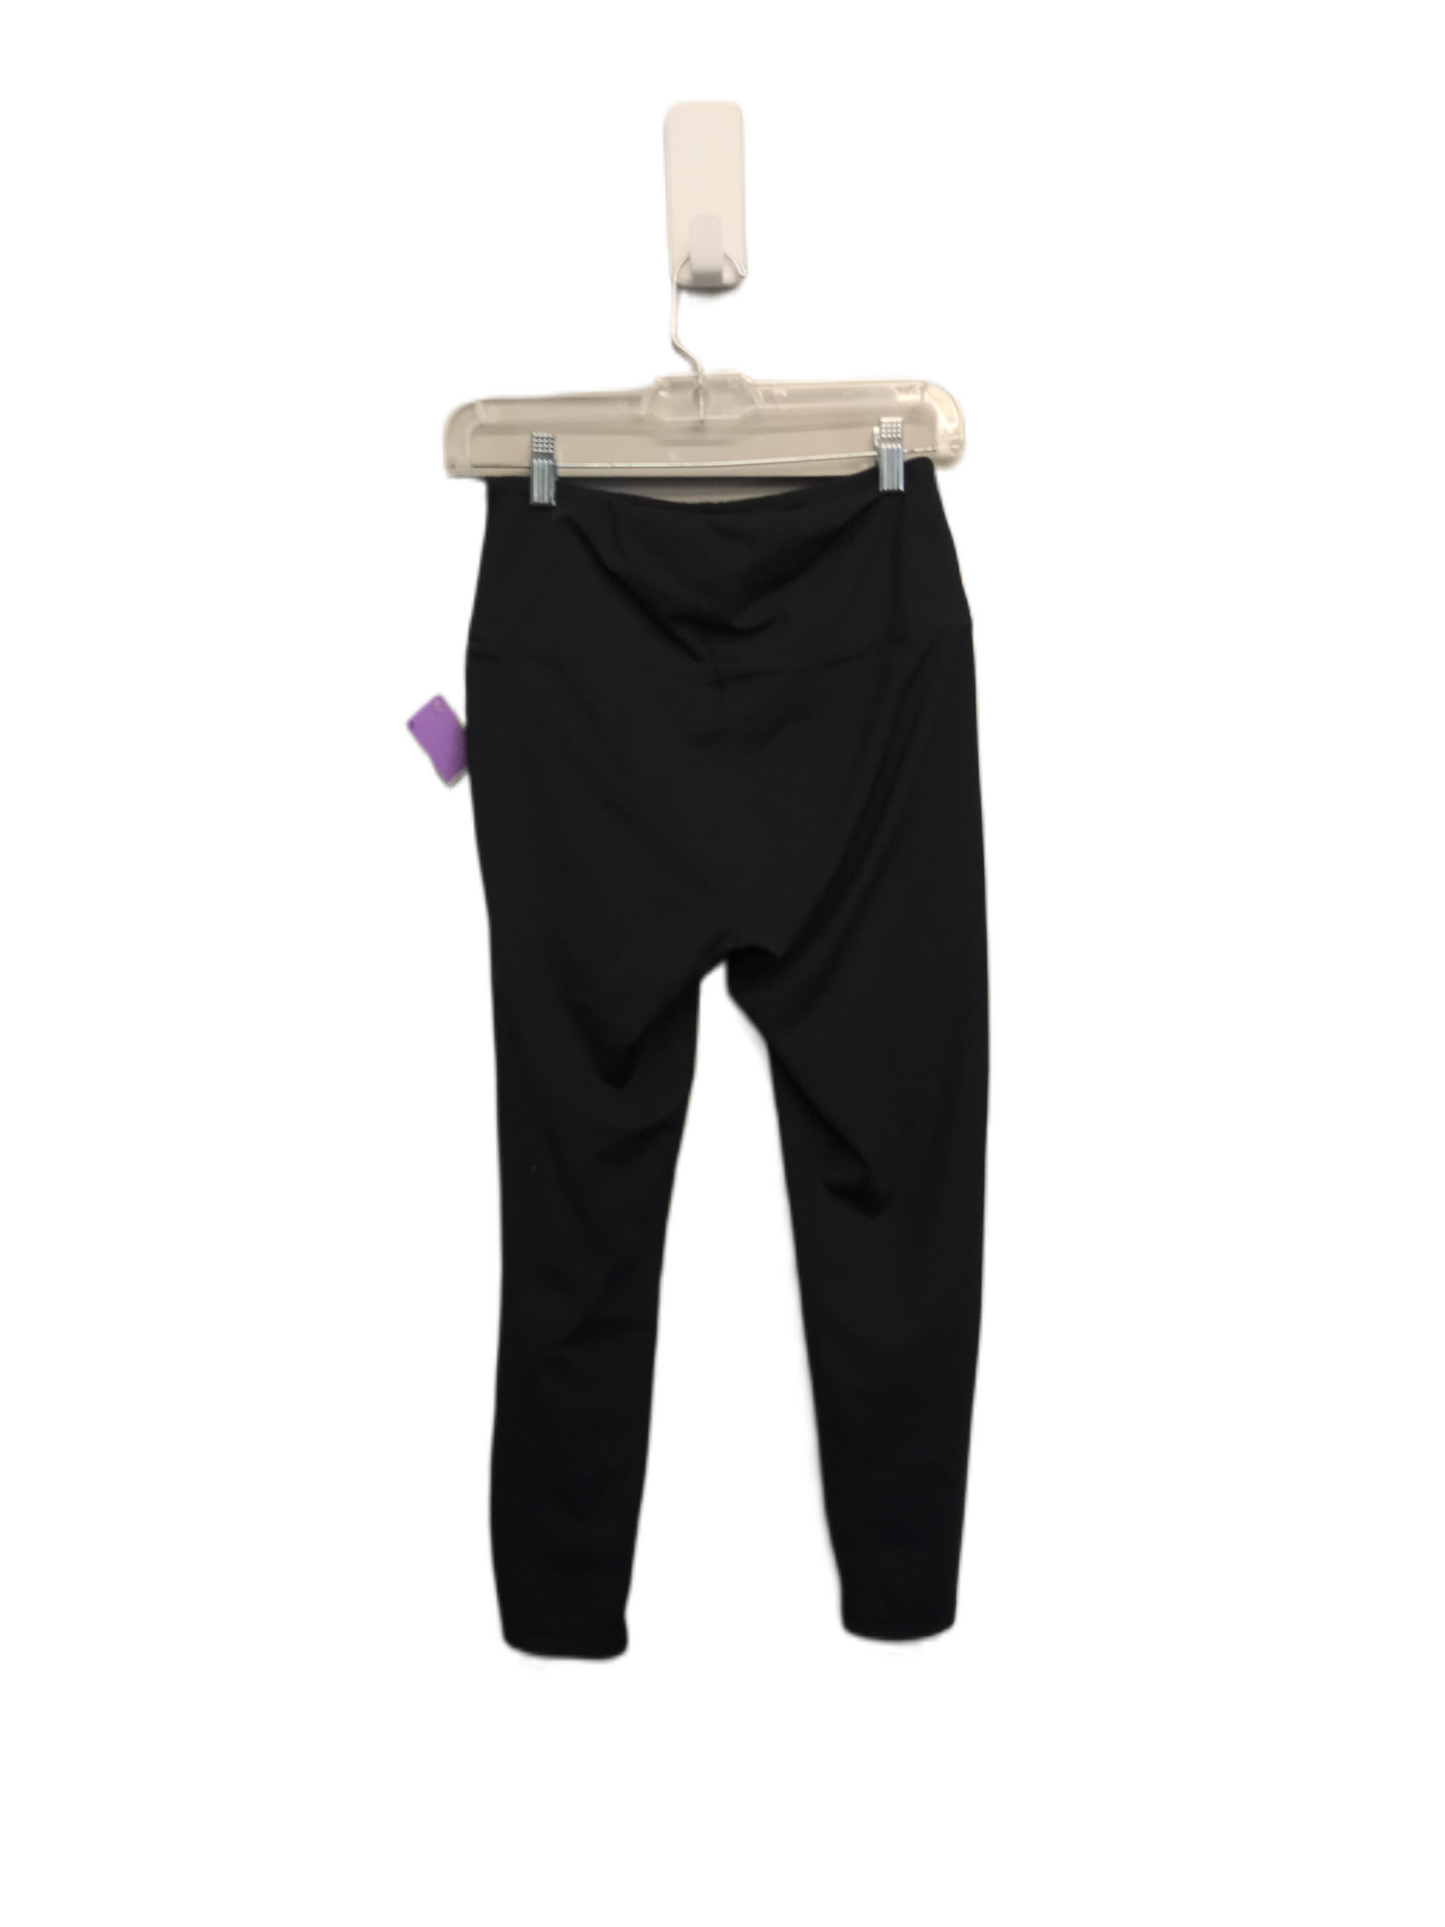 Black Athletic Leggings By  Cut The Frills Size: M